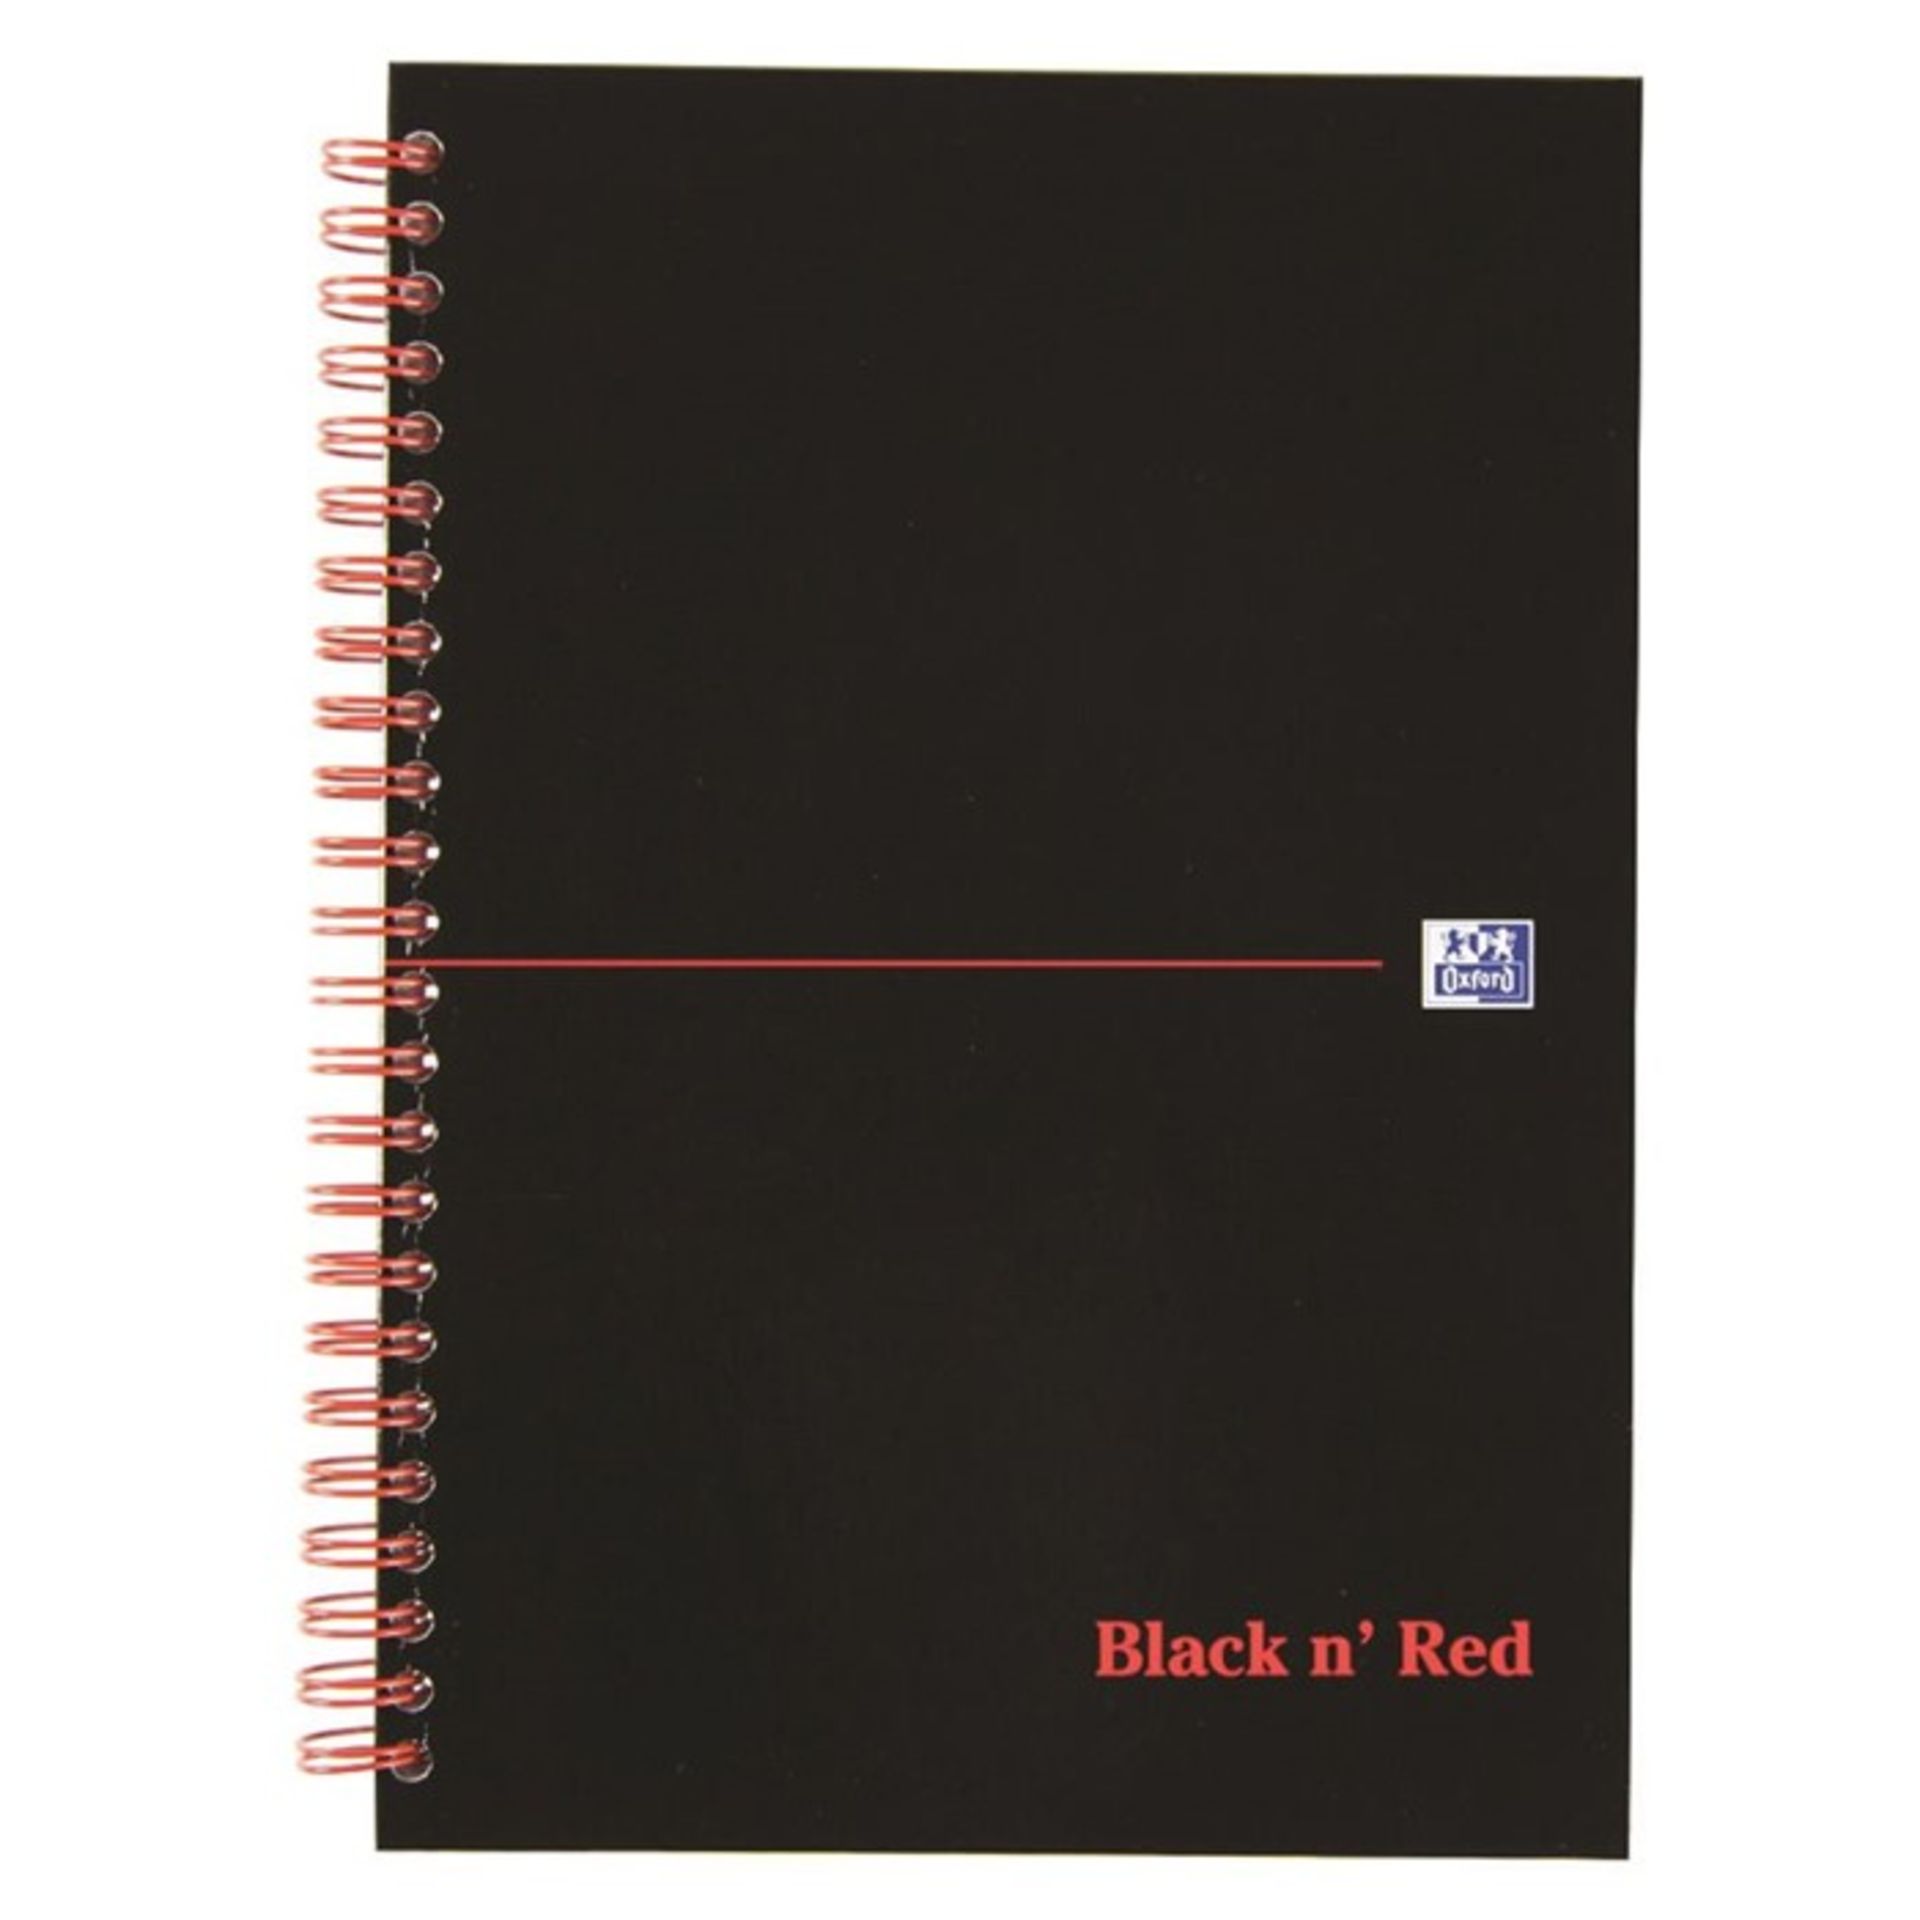 1 OXFORD BLACK N' RED WIREBOUND NOTEBOOK / RRP £8.99 (VIEWING HIGHLY RECOMMENDED)